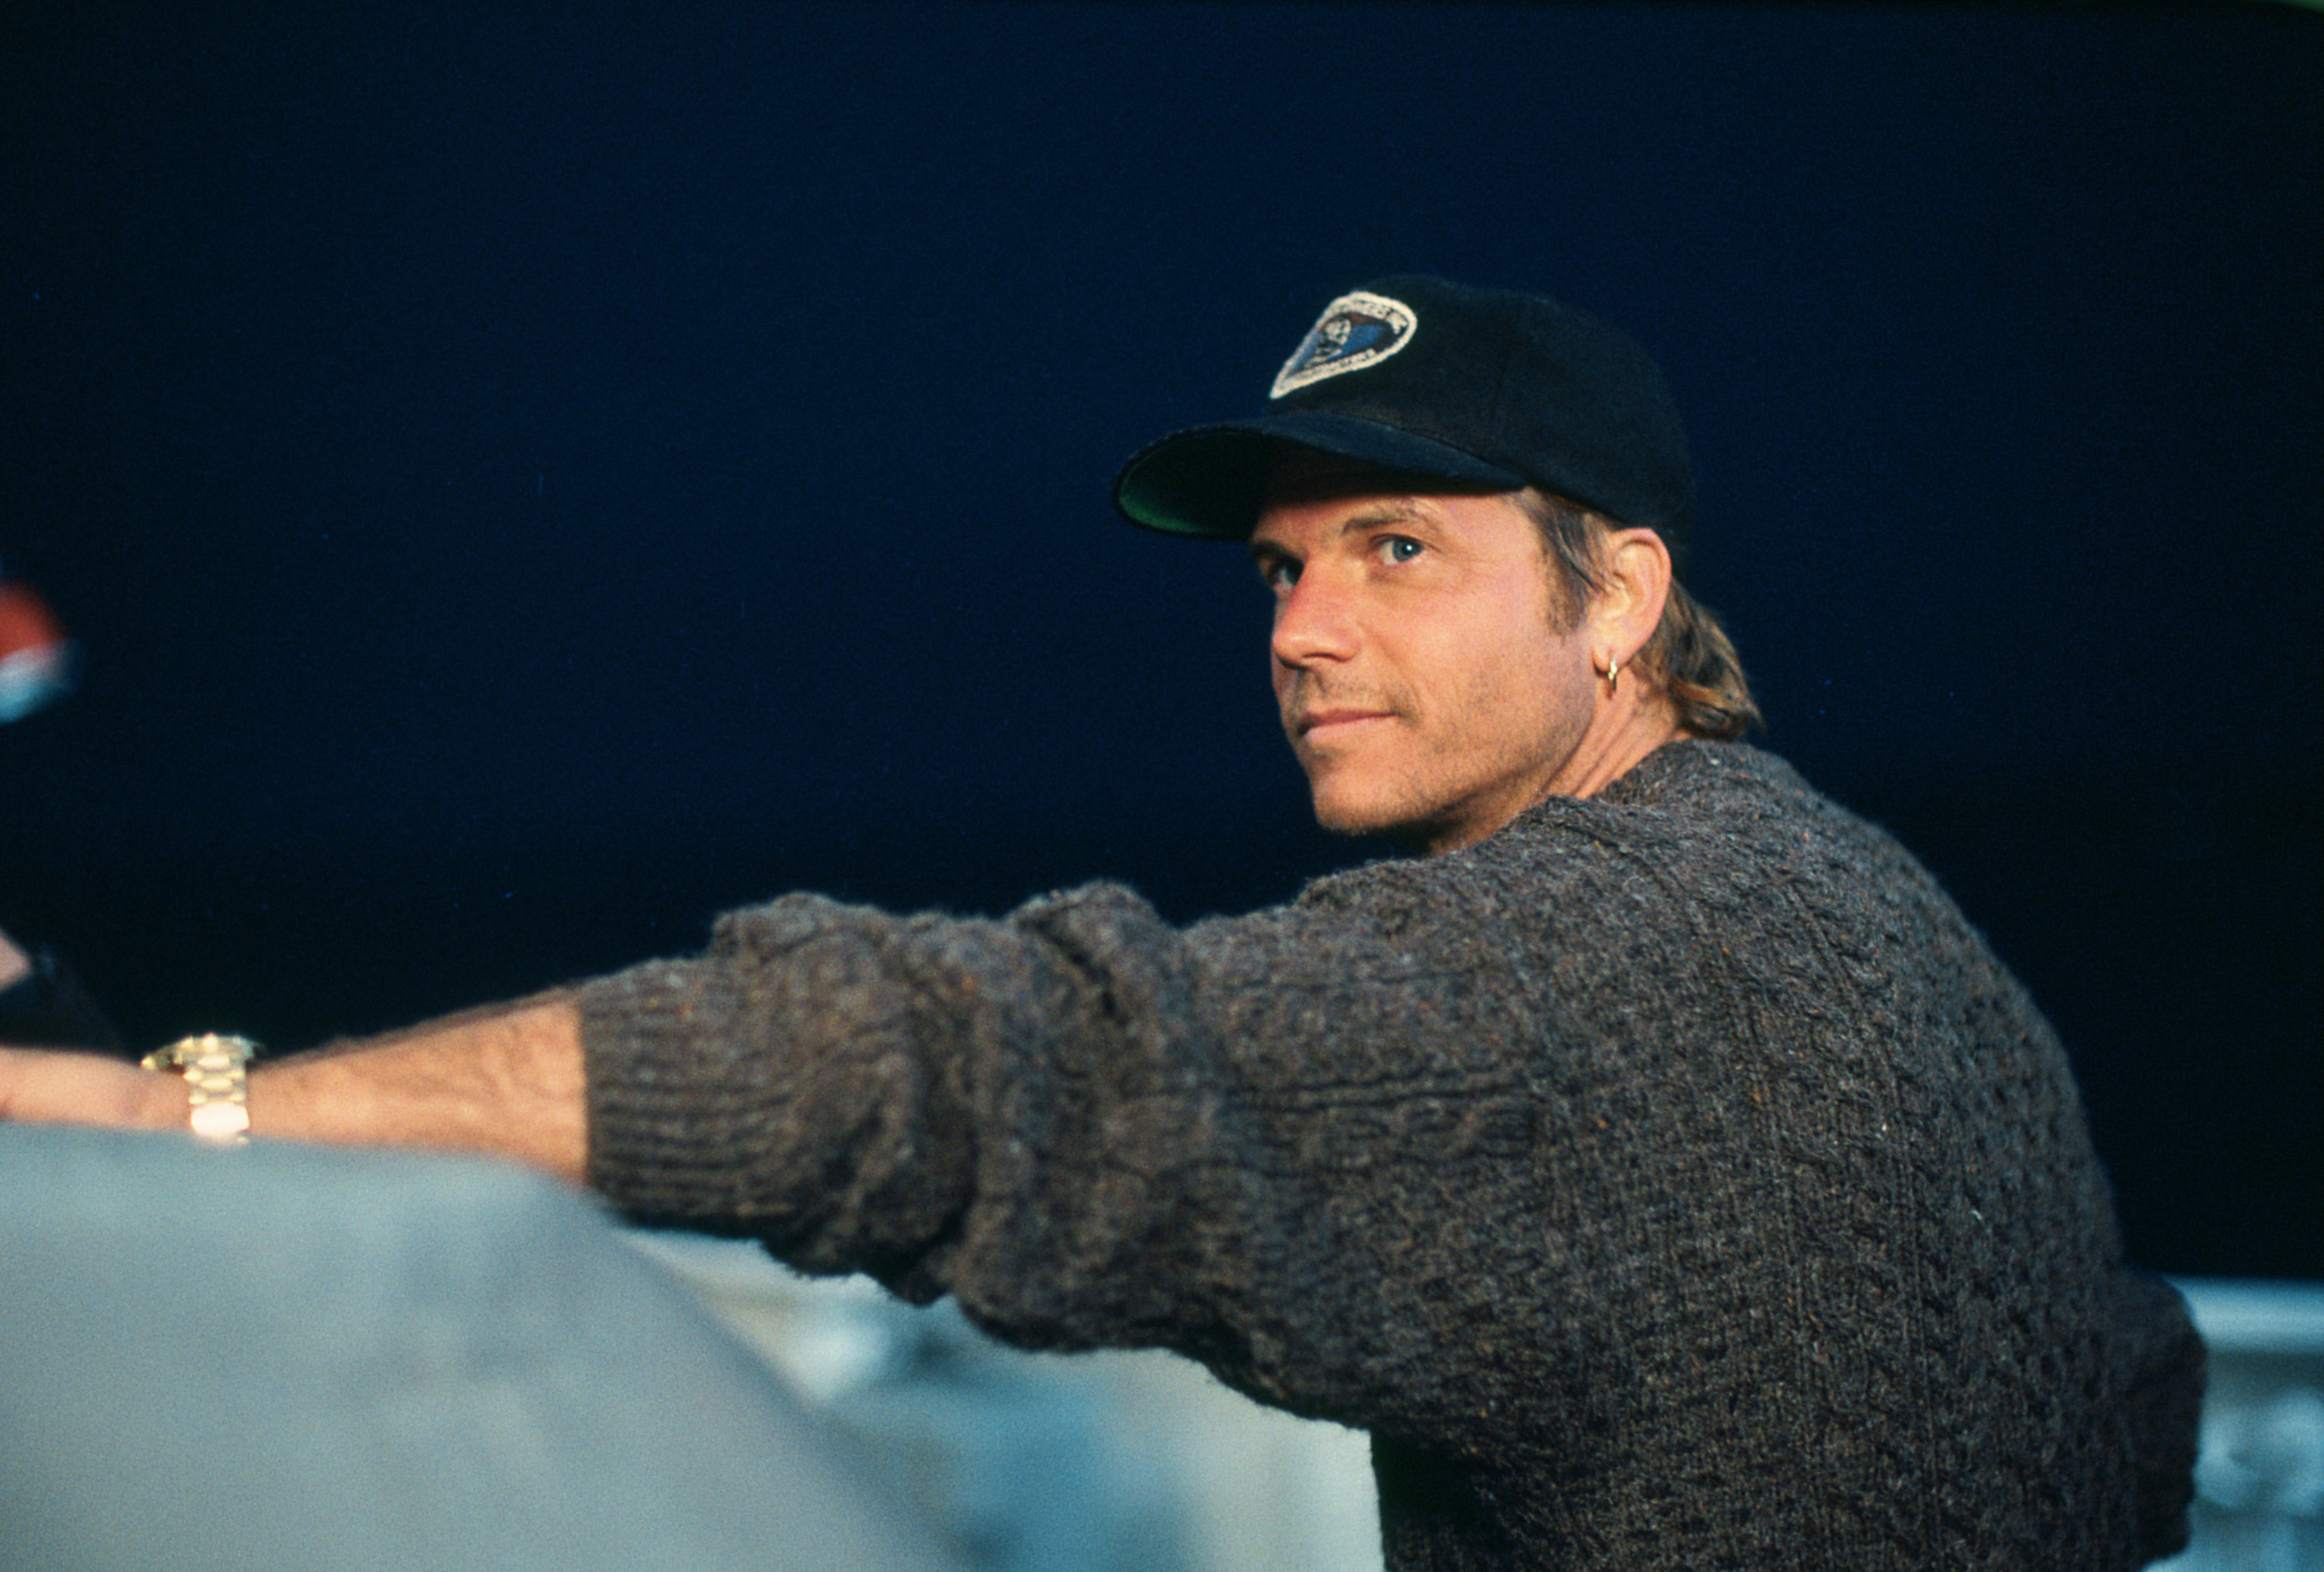 Man in knit sweater and baseball cap looking over shoulder, casual attire